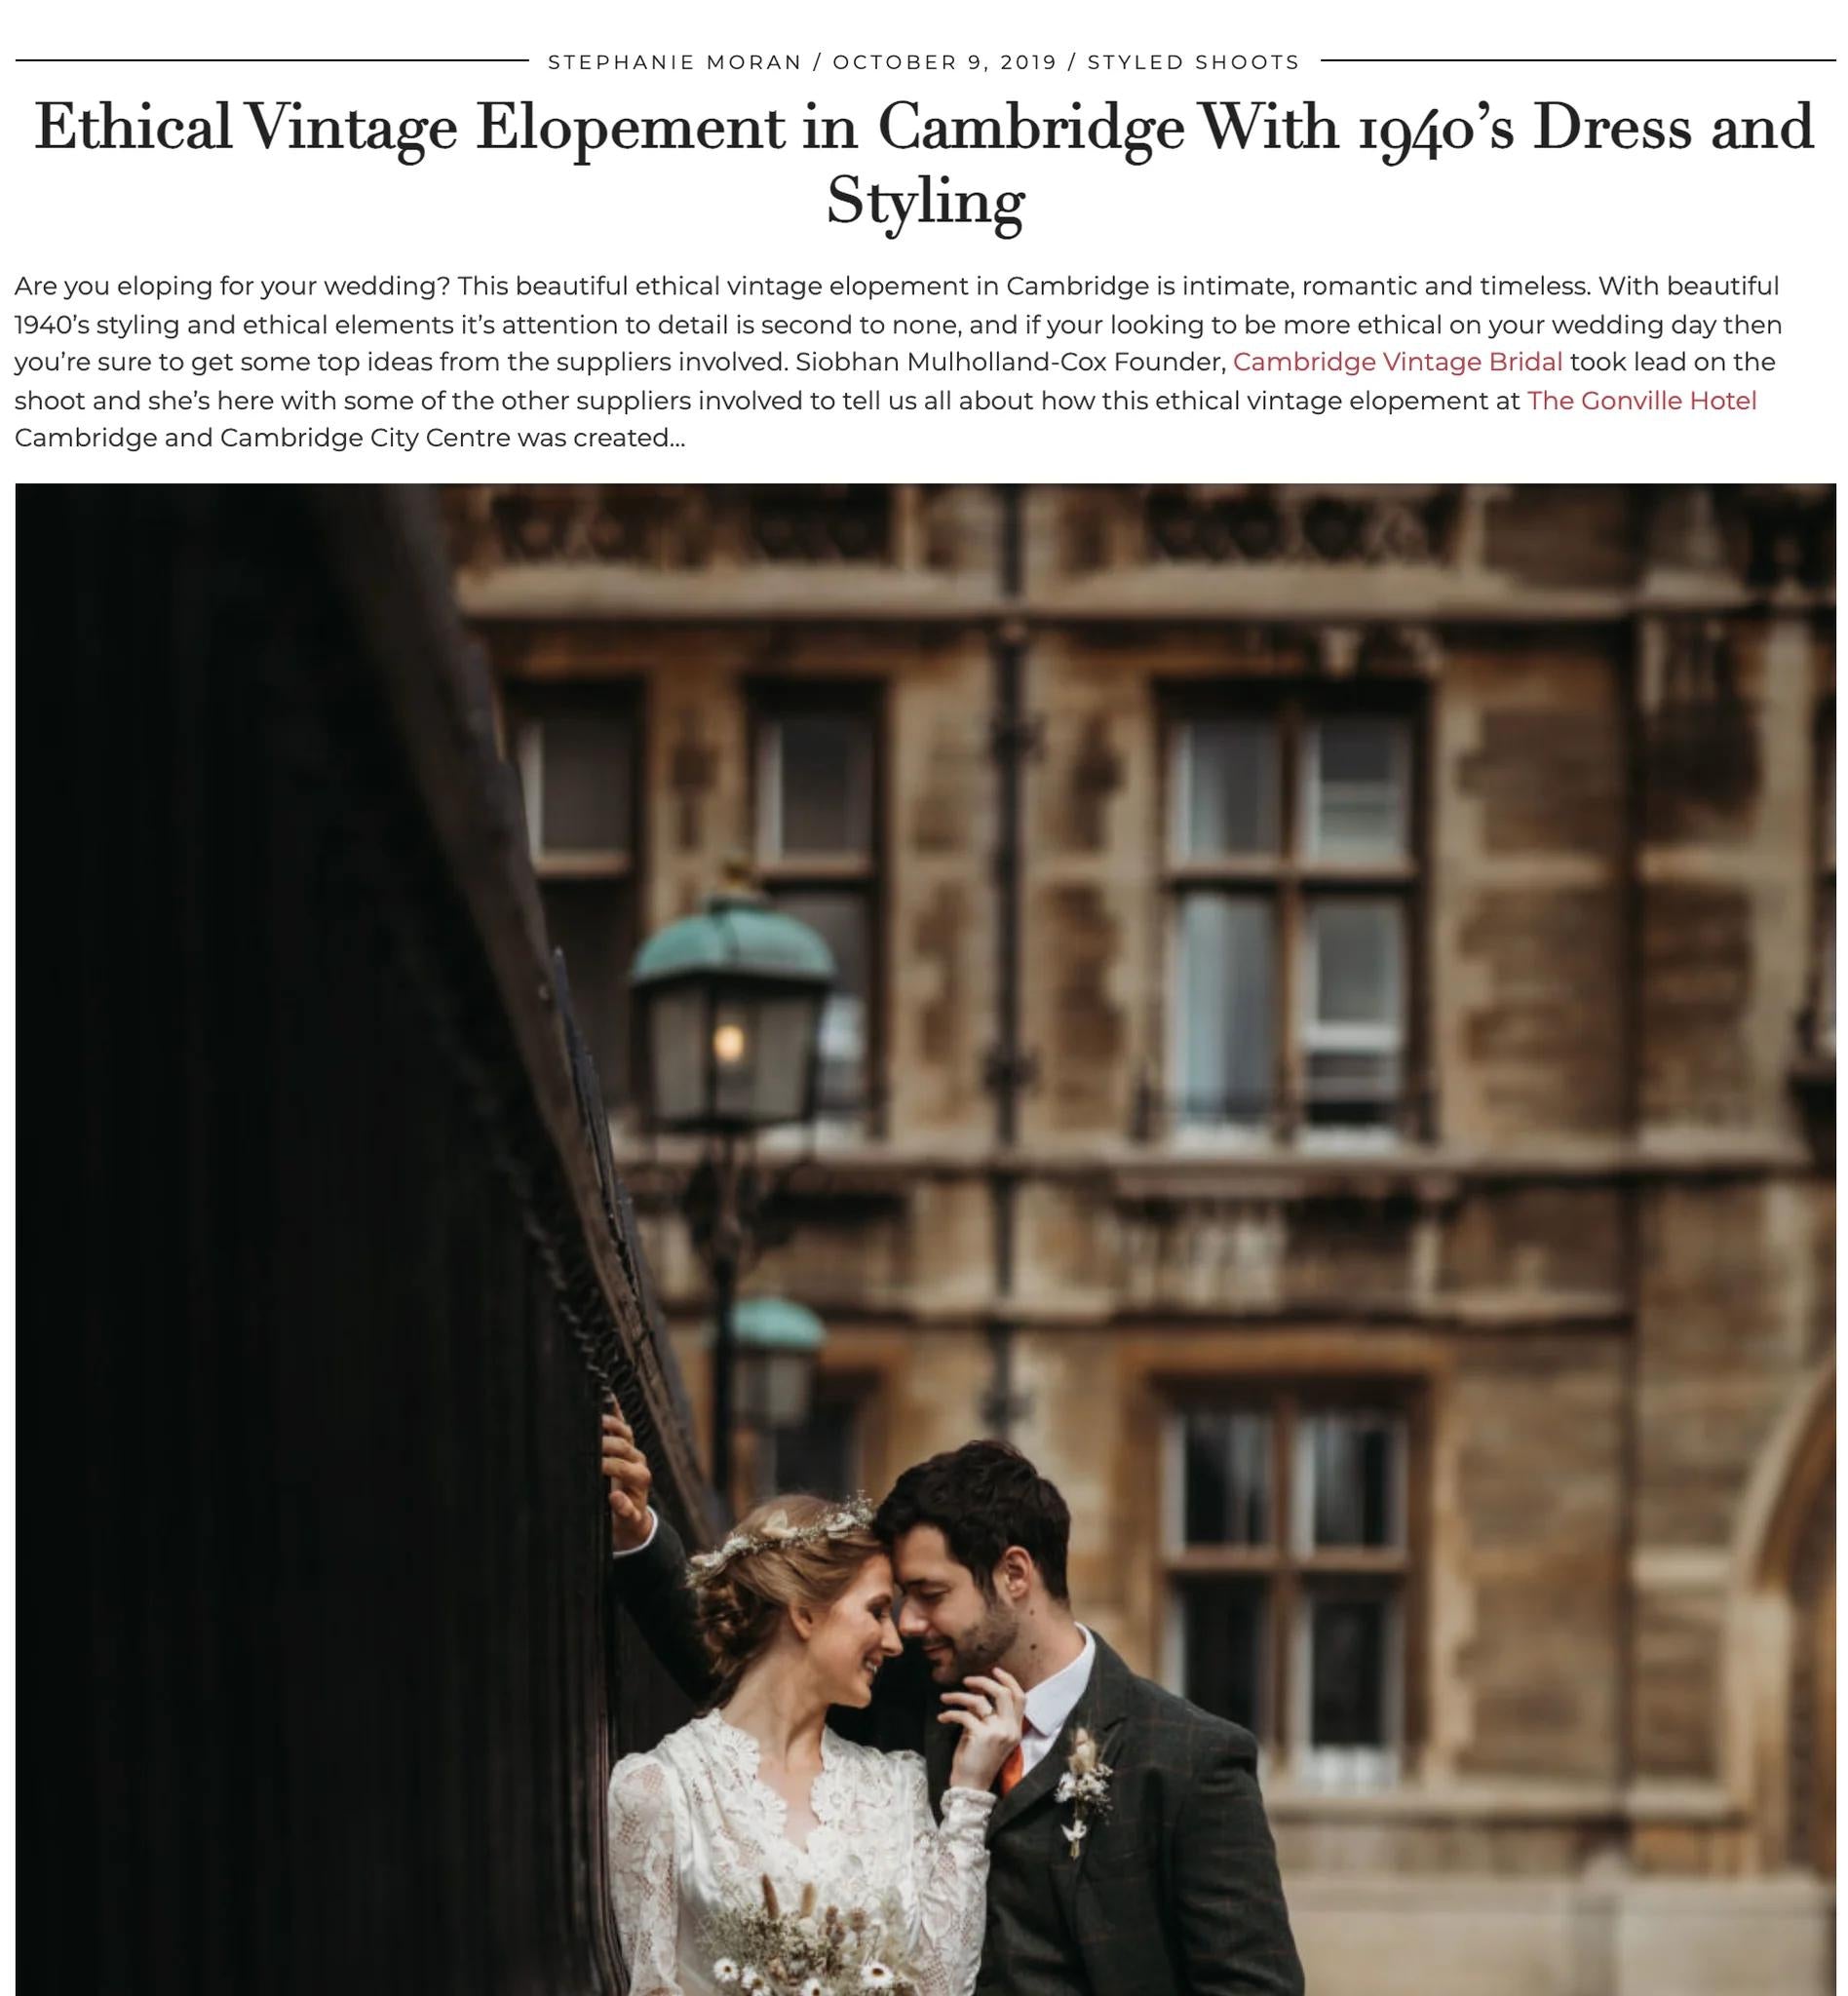 Ethical vintage wedding elopement with 1940s theme